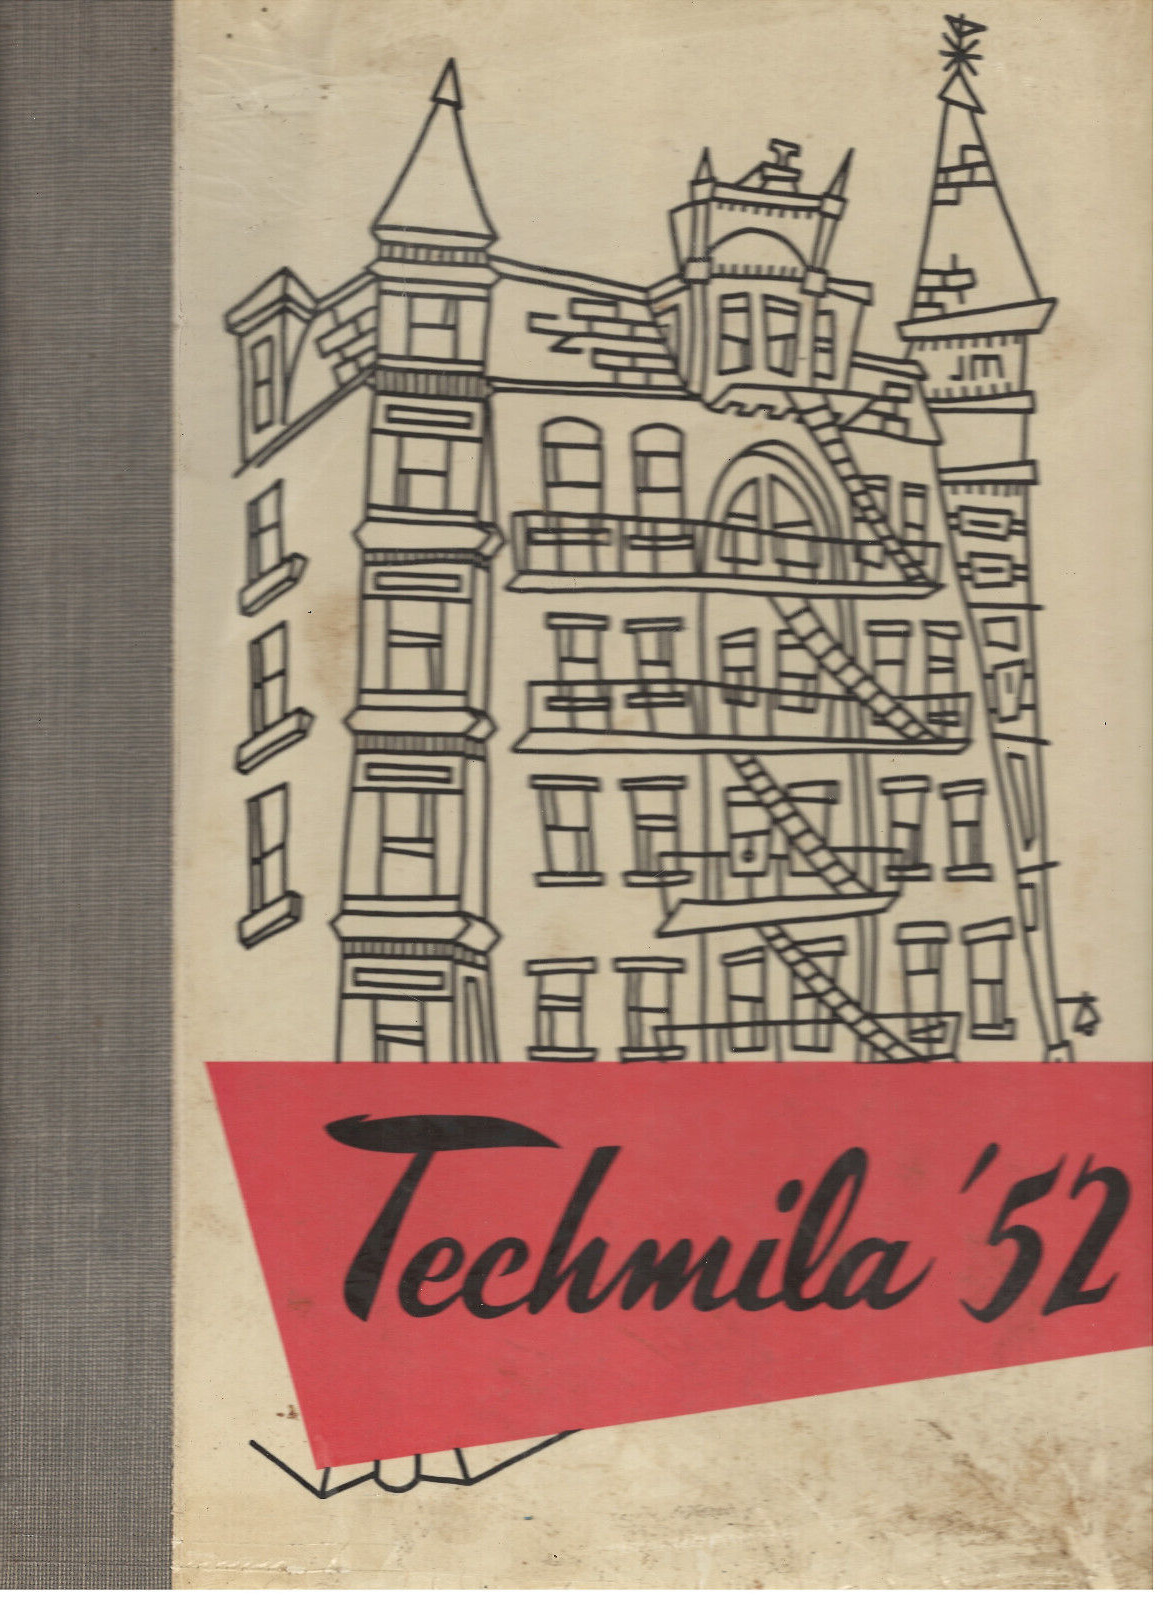 Vintage Yearbook: 1952 Techmila - Rochester Institute of Technology